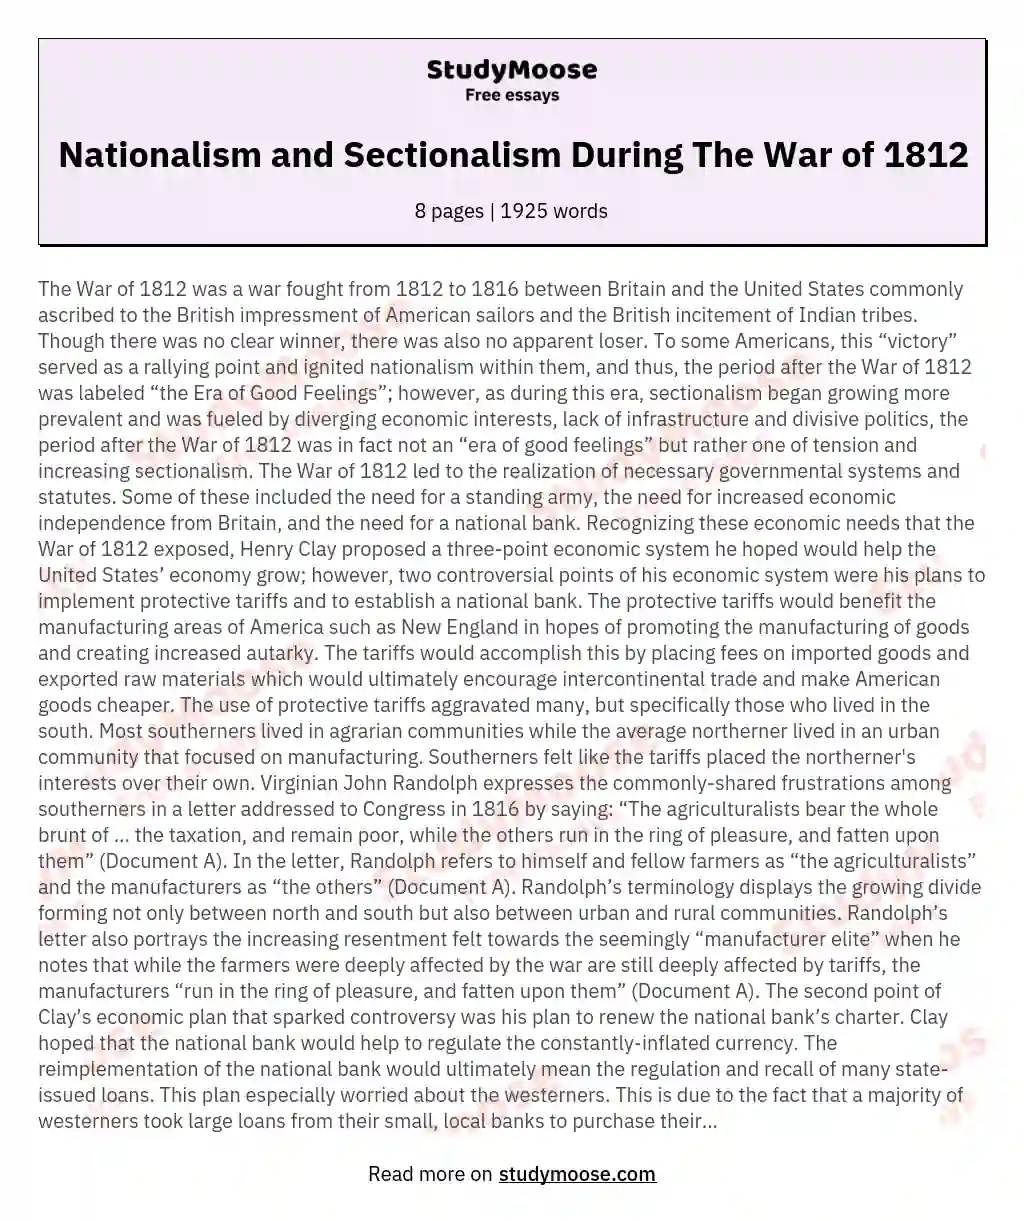 Nationalism and Sectionalism During The War of 1812